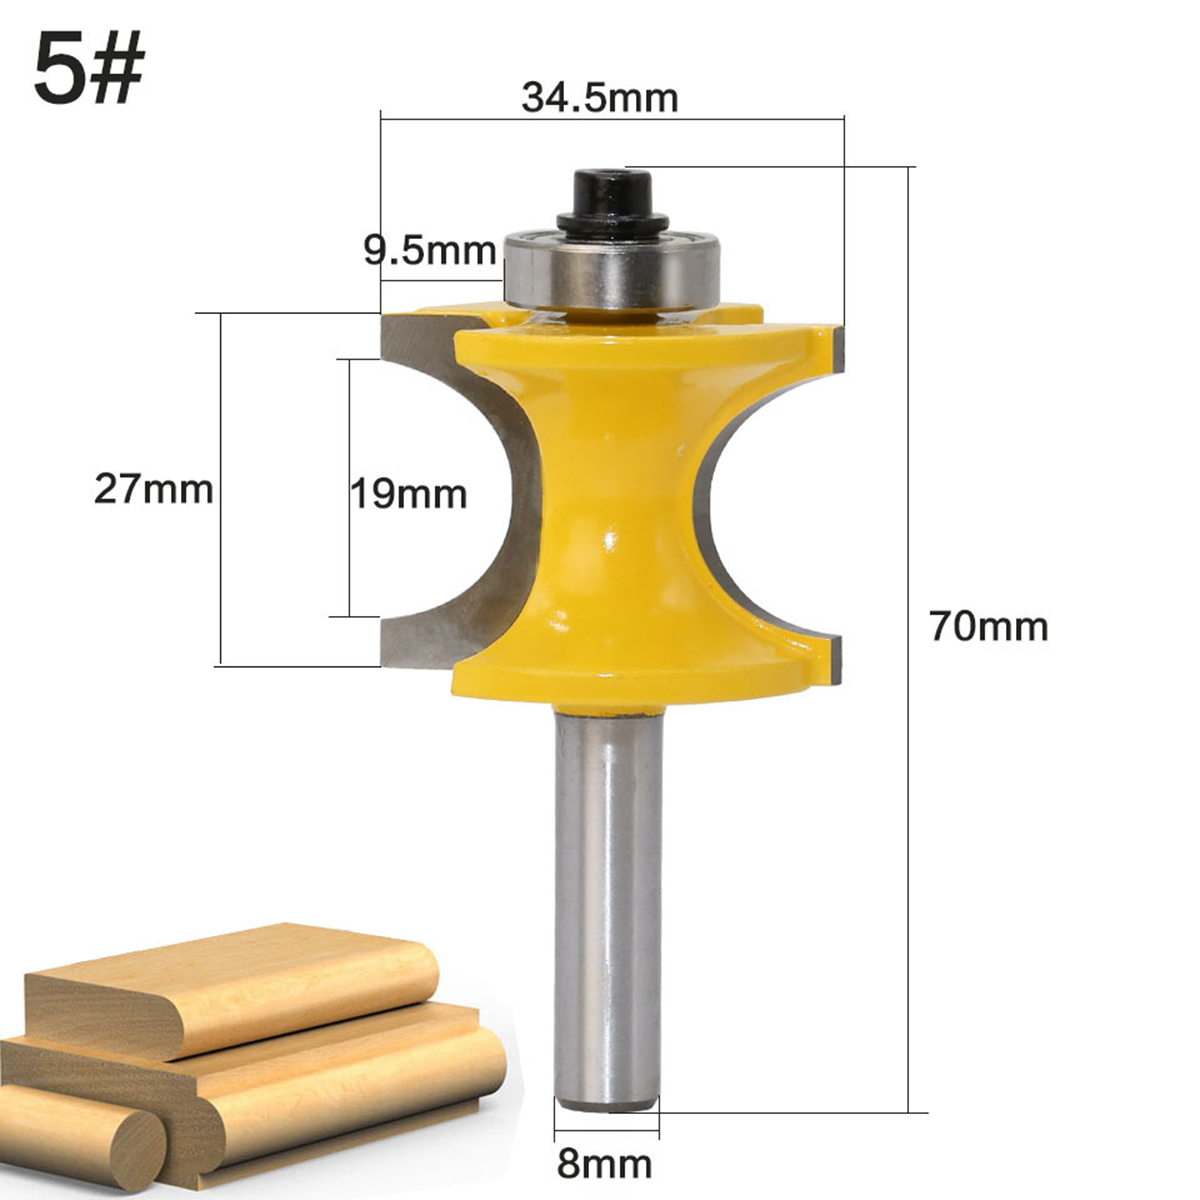 8mm-Shank-Round-Over-Router-Bit-14-to-58-Inch-Woodworking-Edging-Router-Chisel-Groove-Cutter-1525933-7